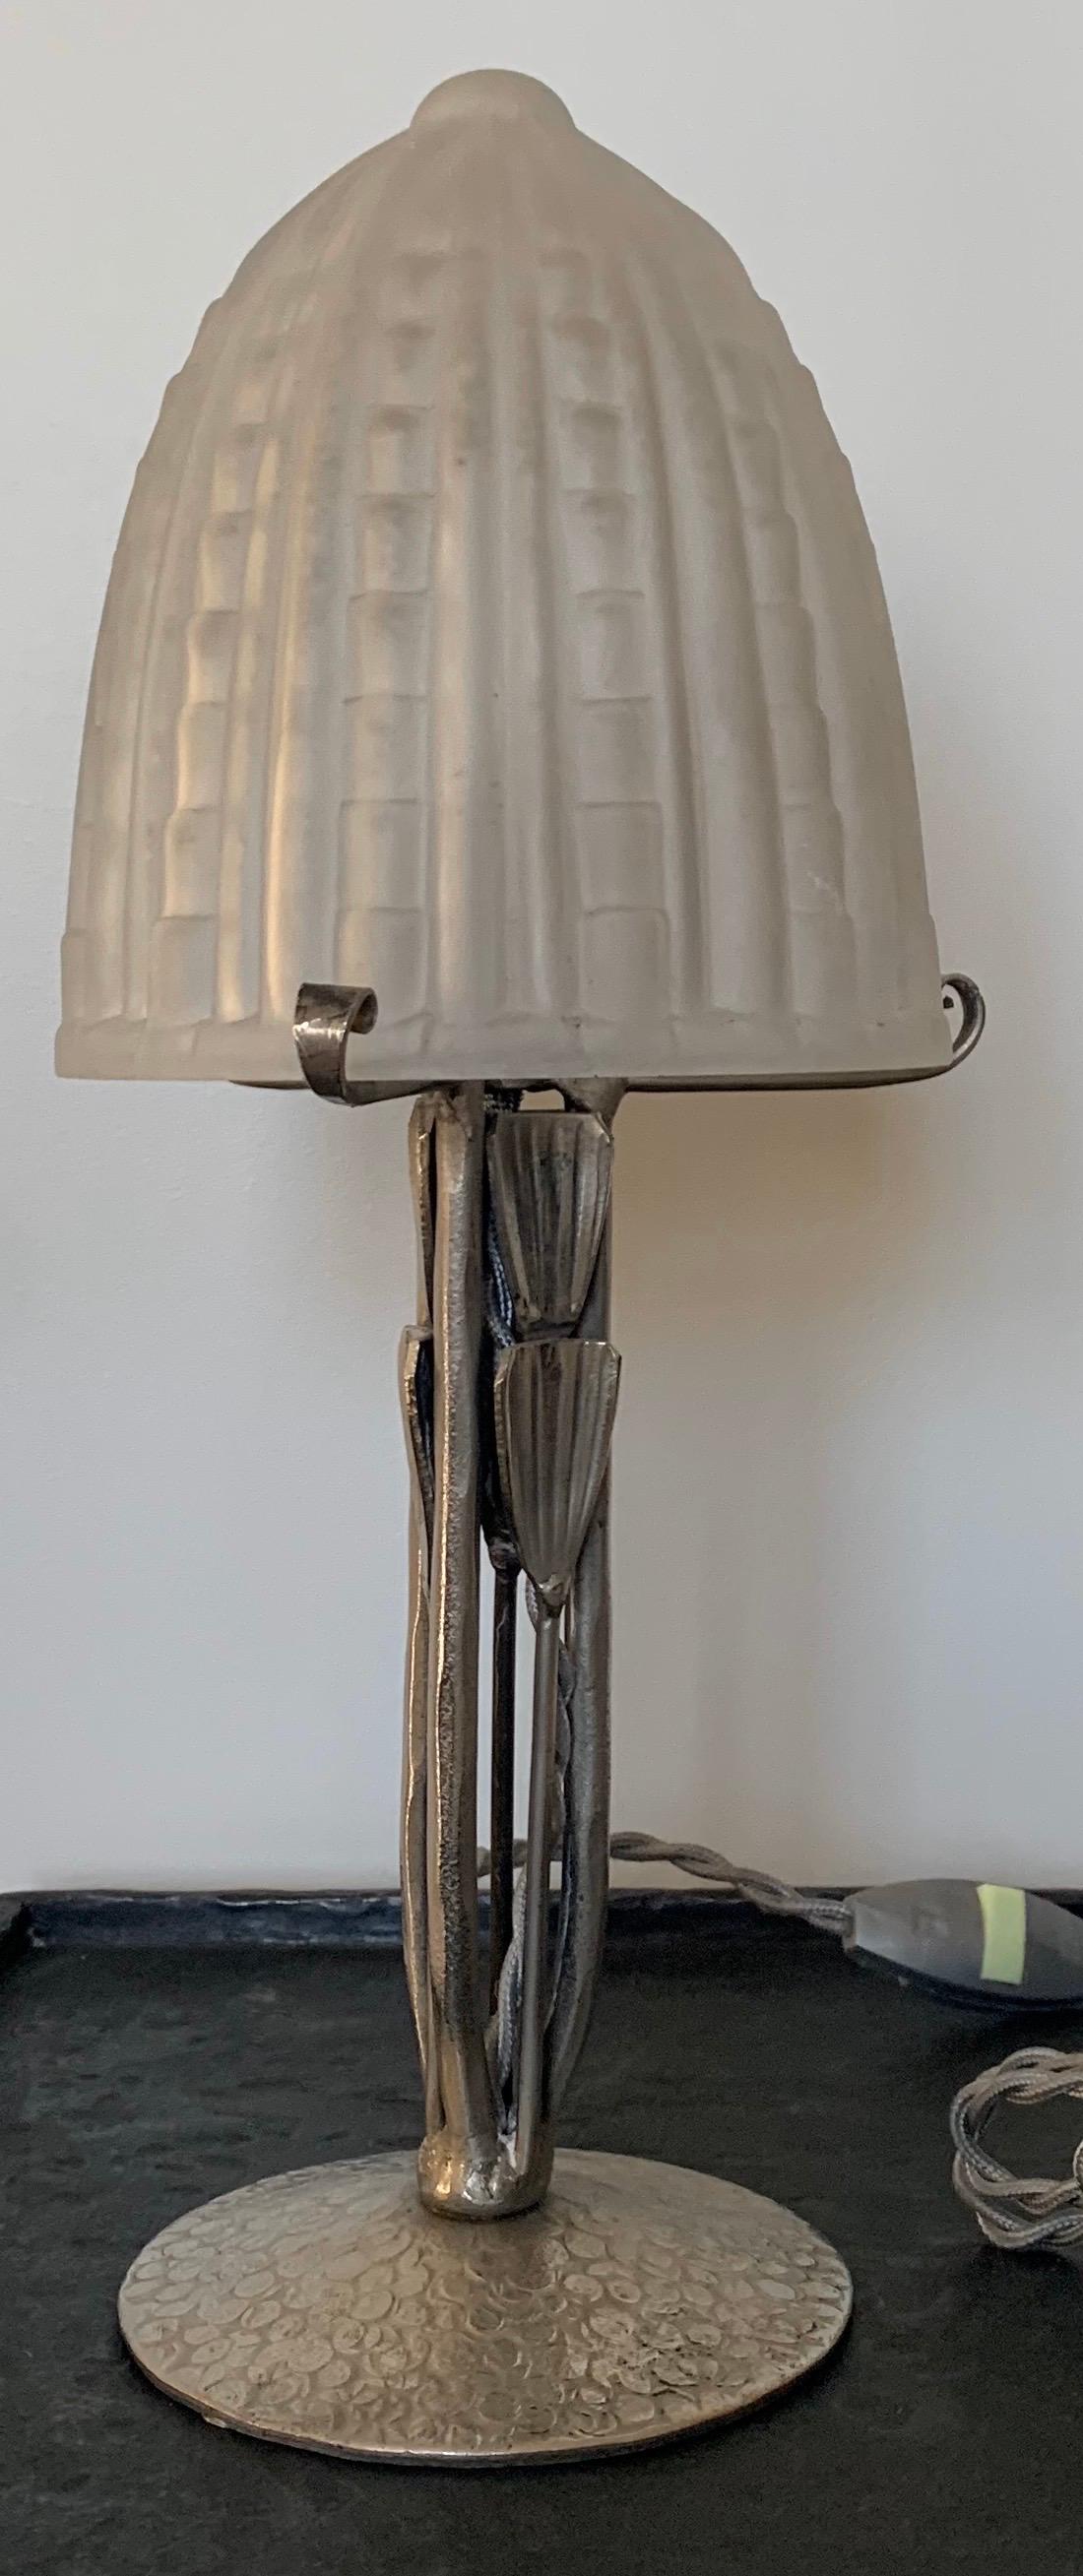 Petite French pewter Art Deco table lamp. Original frosted glass lampshade. Newly rewired with grey silk cord with side switch. Lamp takes one candelabra size bulb, max 60 watts. Bulb not included. Lamp is 9” tall without lampshade.